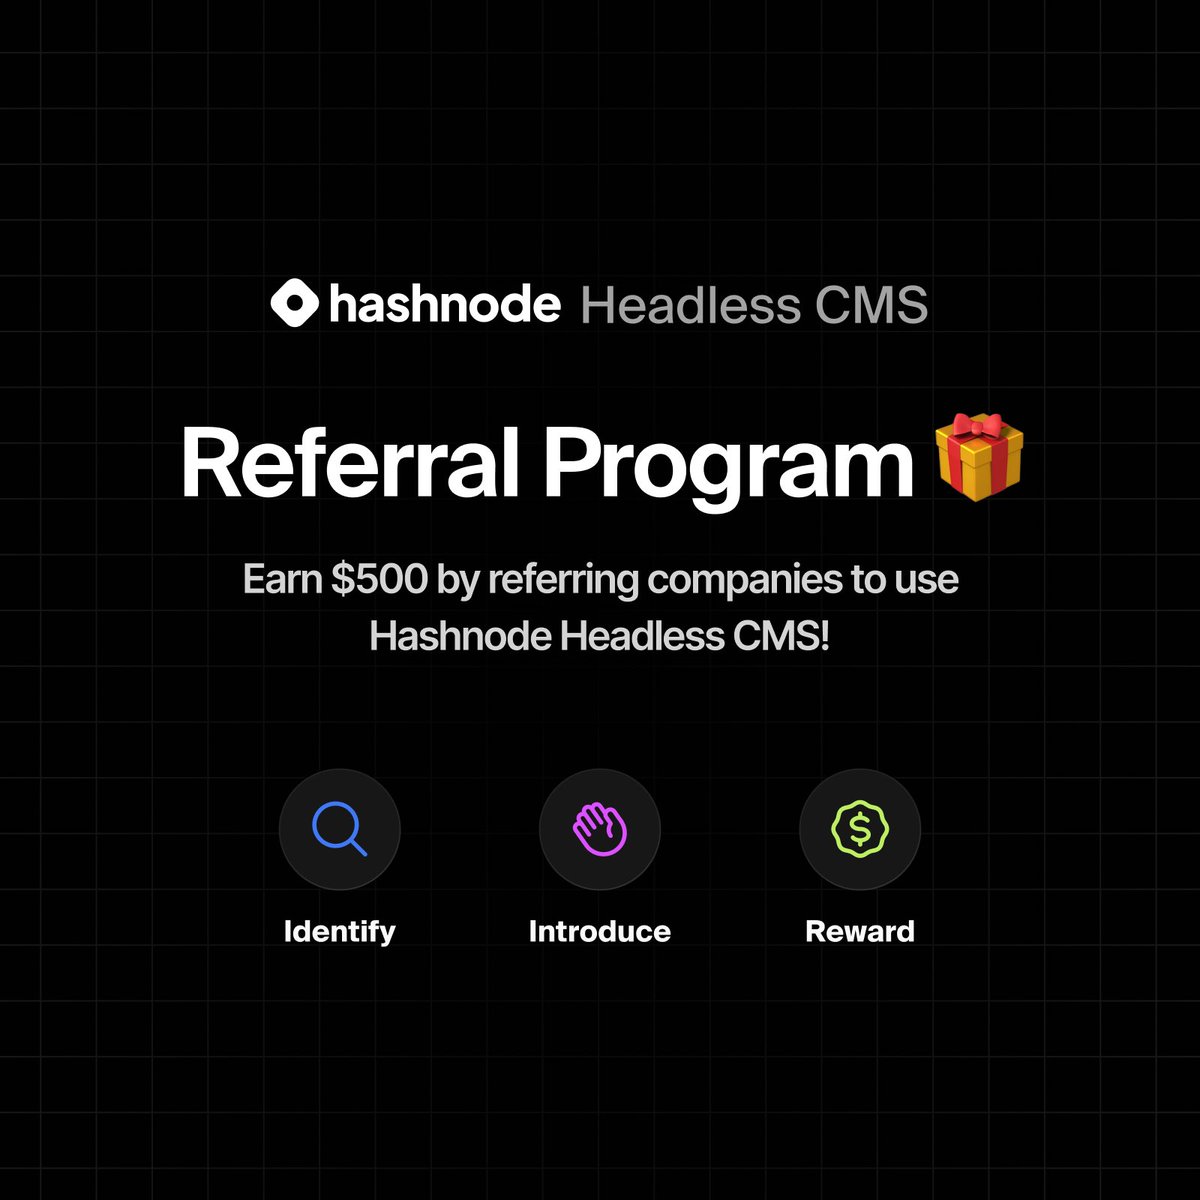 We just launched @hashnode’s first referral program to reward the community for their help! ❤️ Learn more: townhall.hashnode.com/hashnode-refer… … and help us grow! 💪